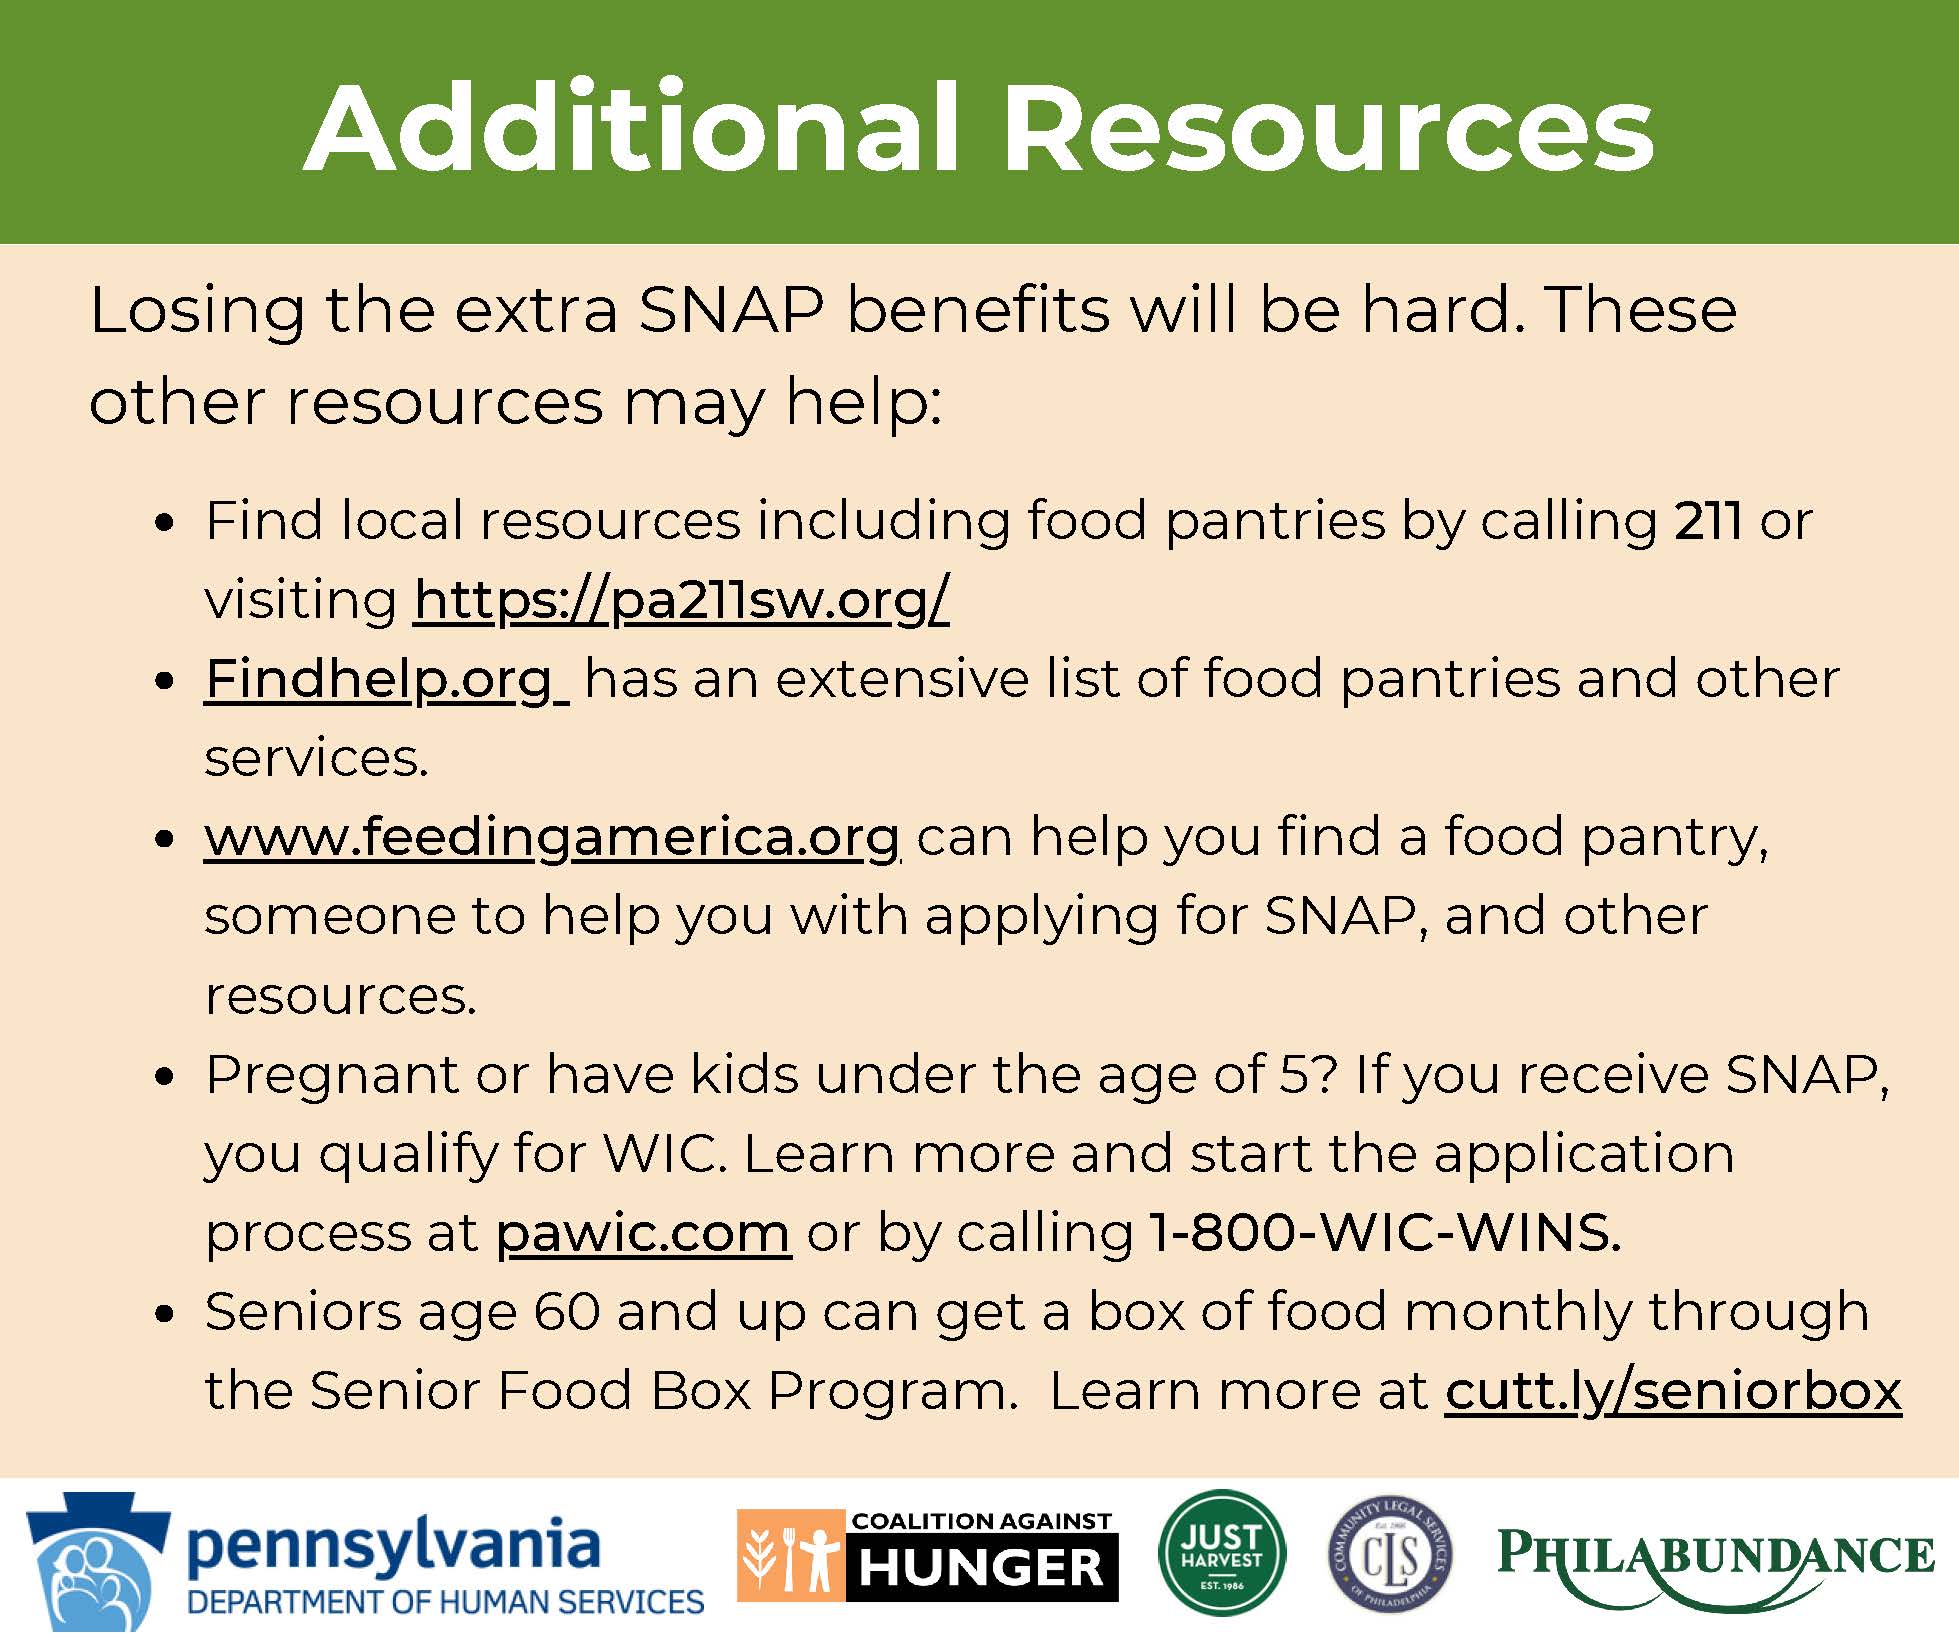 General Information Graphic Additional Resources Losing the extra SNAP benefits will be hard. These other resources may help: Find local resources including food pantries by calling 211 or visiting https://pa211sw.org/ Findhelp.org has an extensive list of food pantries and other services. www.feedingamerica.org can  elp you find a food pantry, someone to help you with applying for SNAP, and other resources. Pregnant or have kids under the age of 5? If you receive SNAP, you qualify for WIC. Learn more and start the application process at  awic.com or by calling 1-800-WIC-WINS. Seniors age 60 and up can get a box of food monthly through the Senior Food Box Program. Learn more at cutt.ly/seniorbox